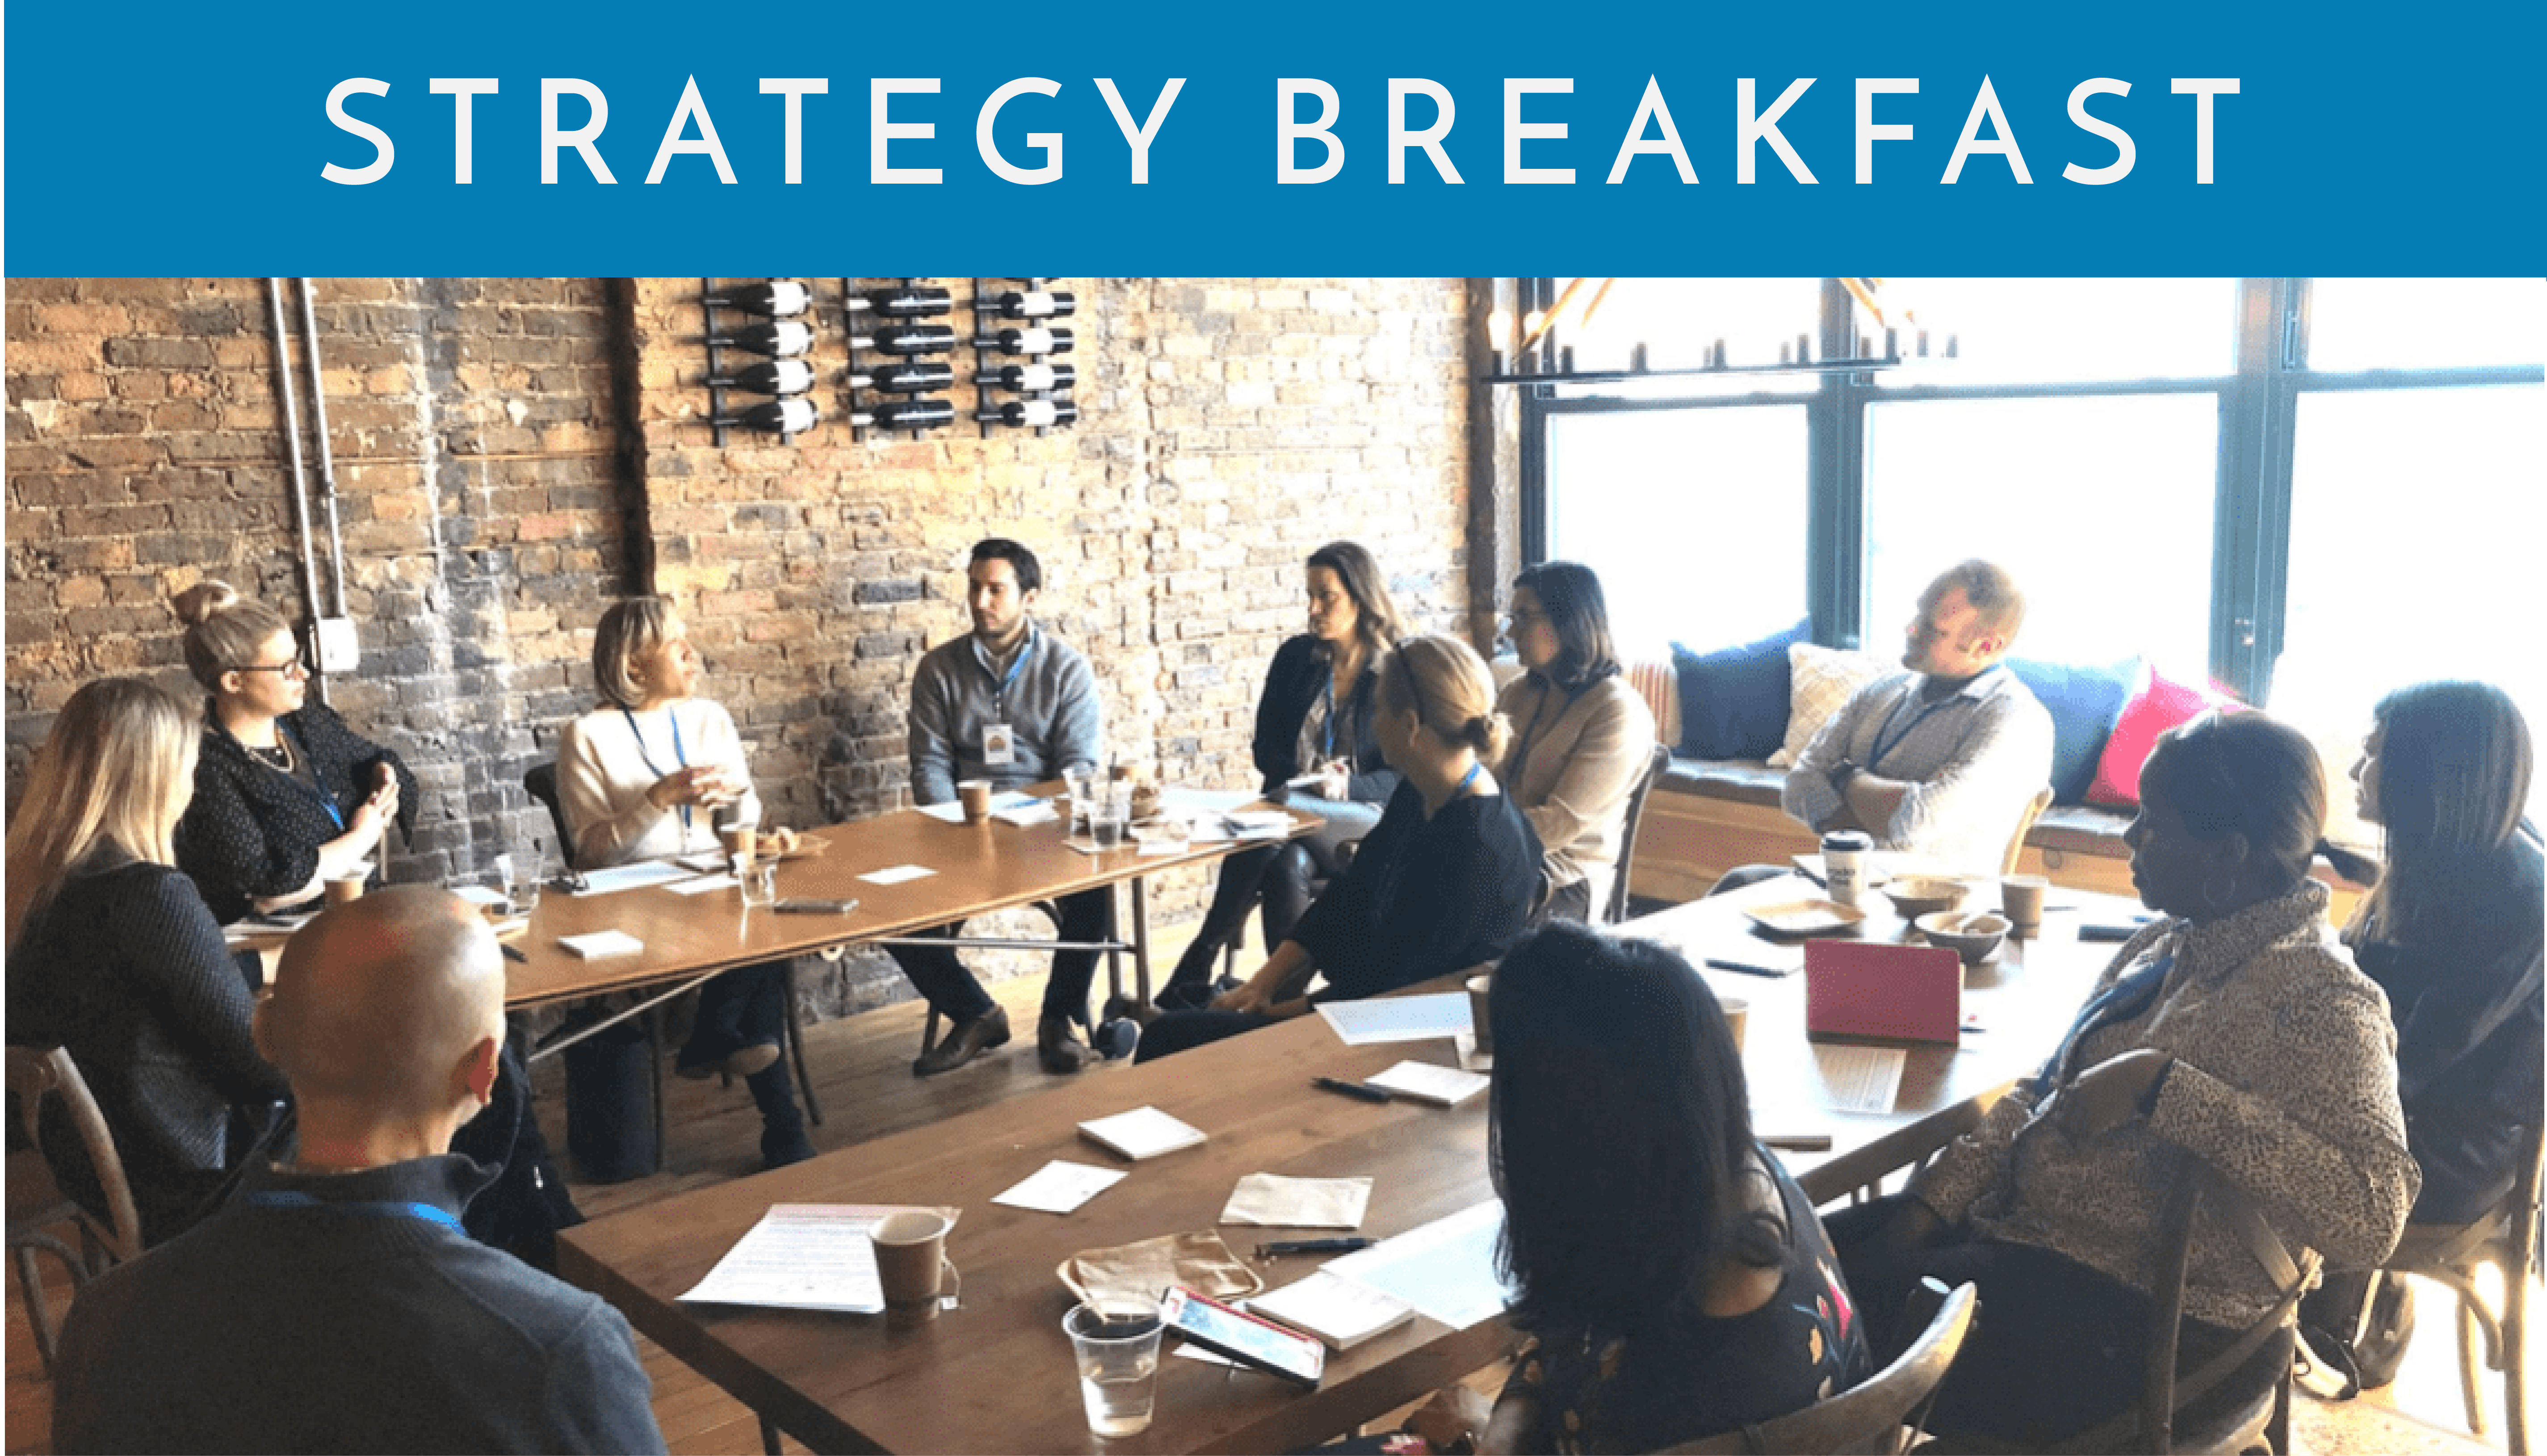 Strategy Breakfast: Let's Have An Honest Conversation About Diversity, Equity and Inclusion 